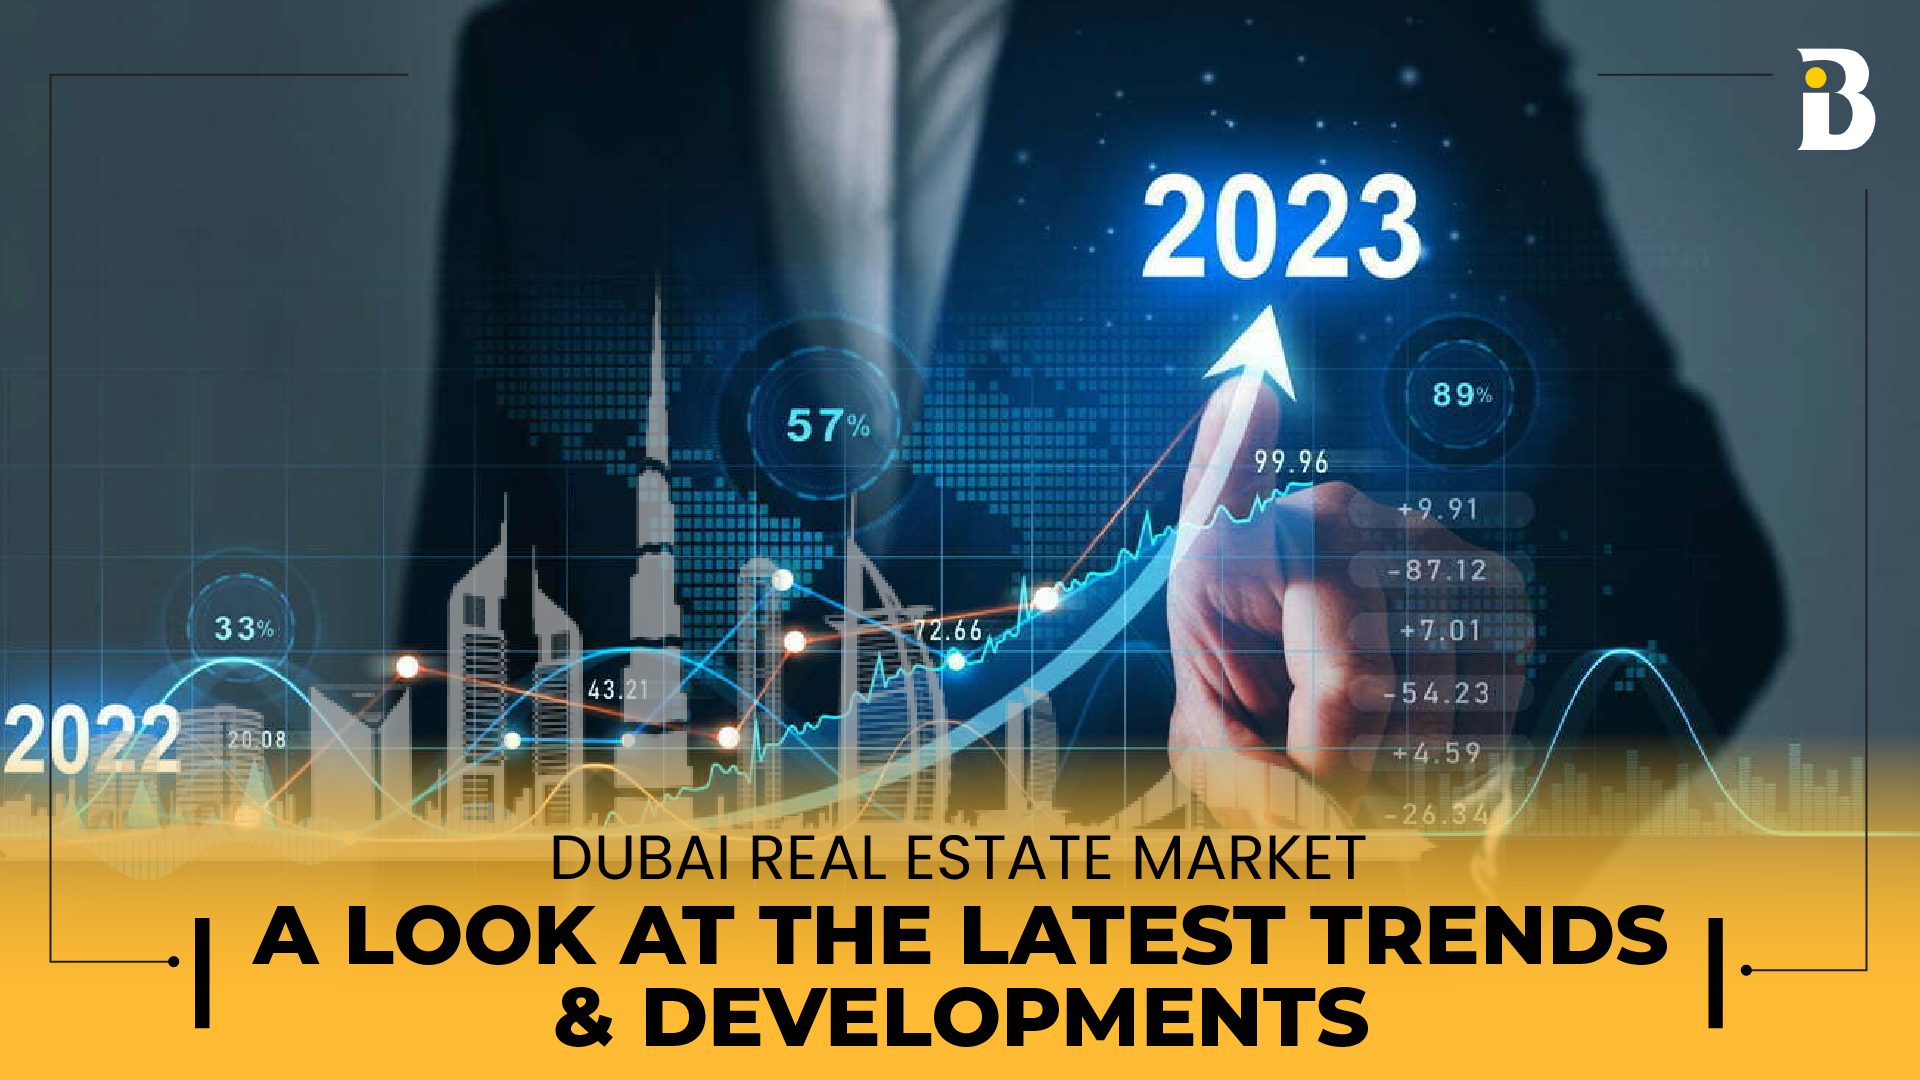 Dubai Real Estate Market: A Look at the Latest Trends and Developments